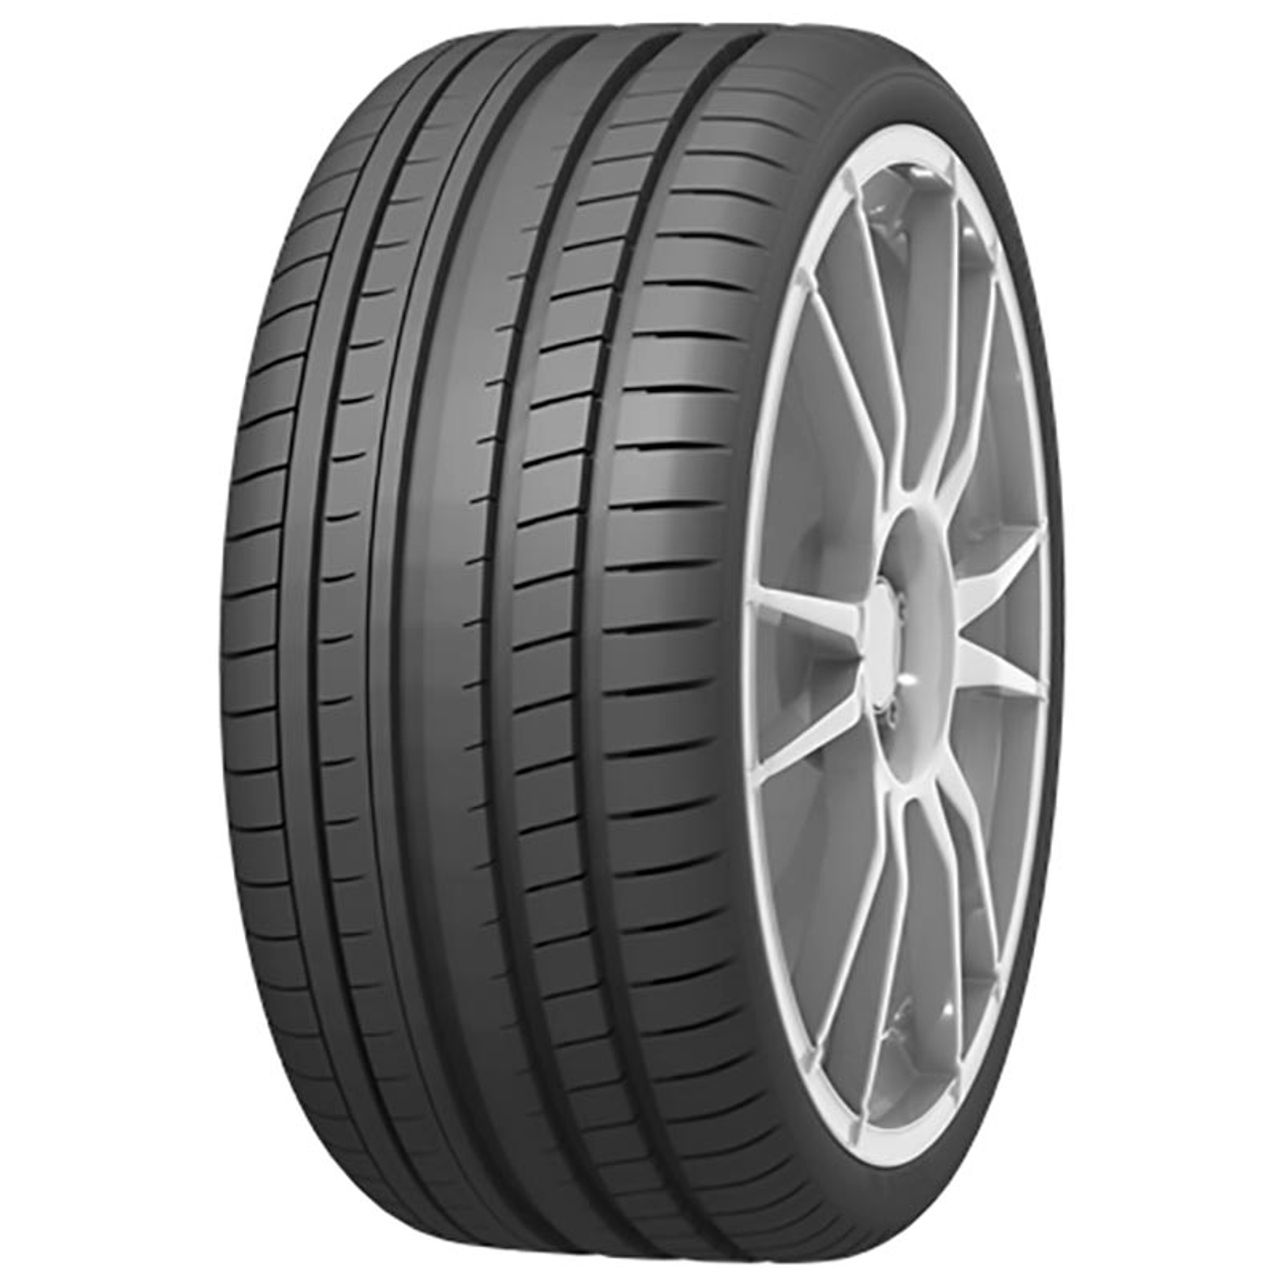 INFINITY ECOMAX 235/35R19 91Y BSW